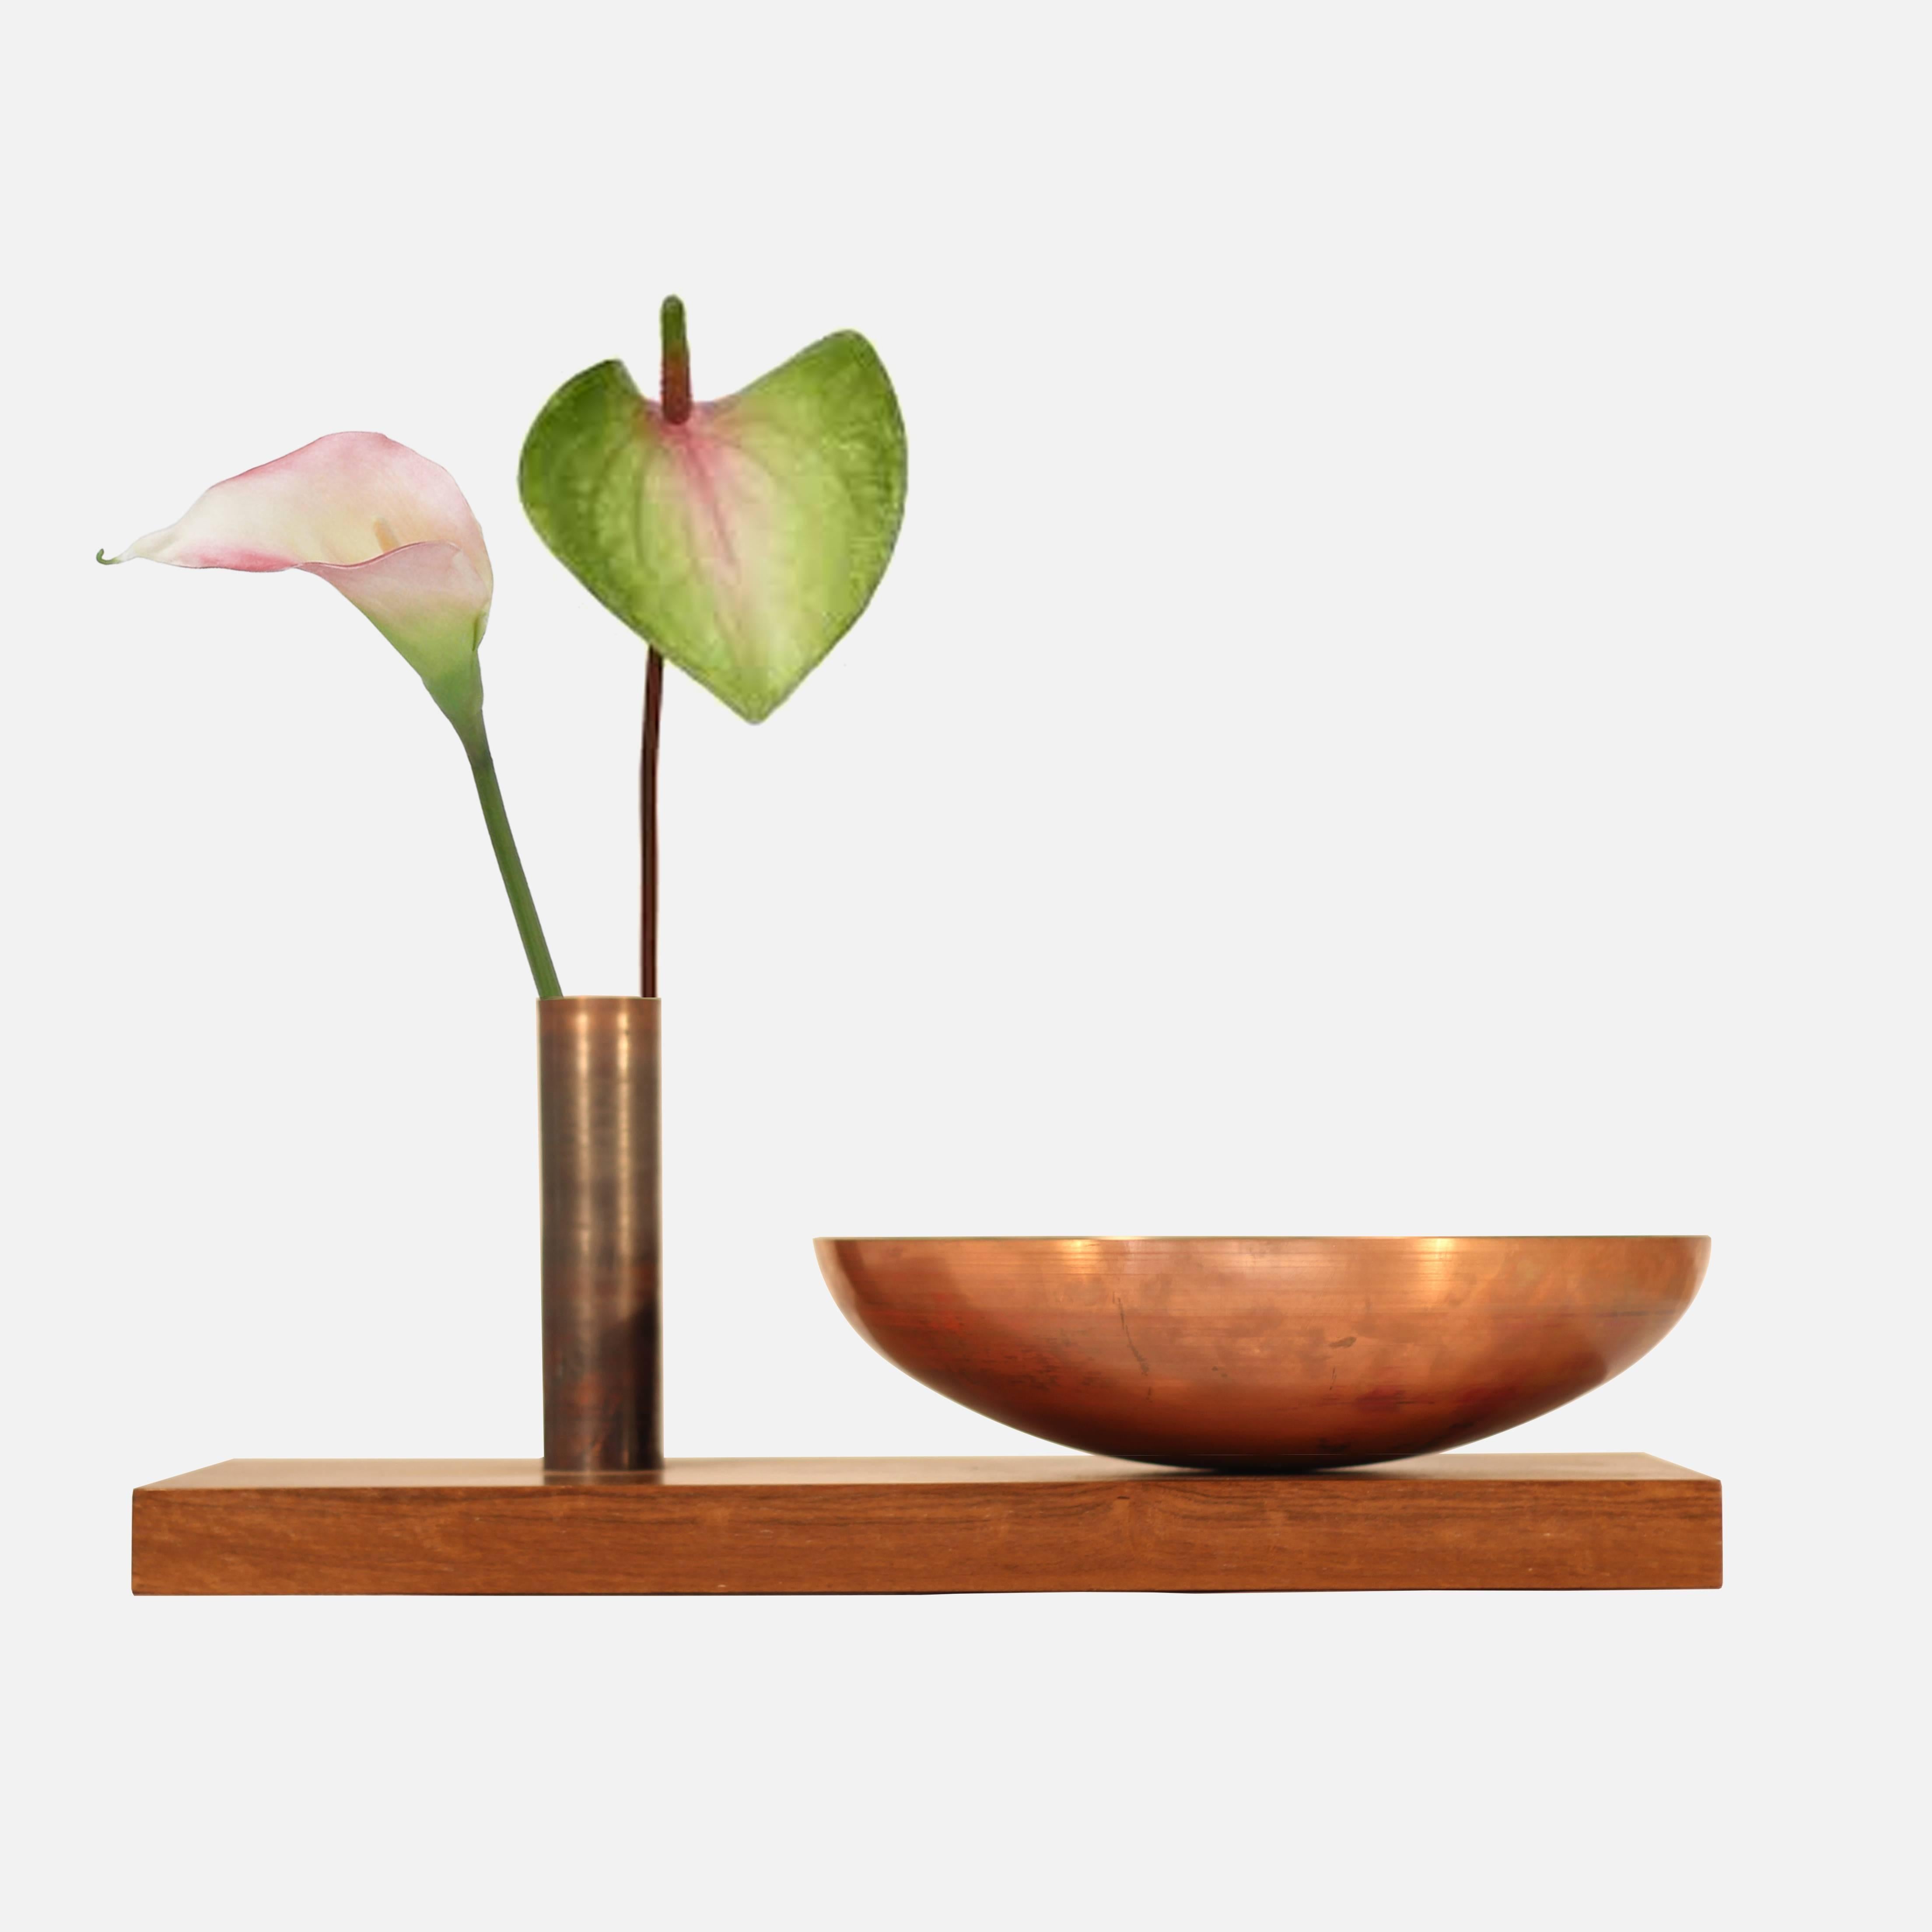 Copper and wood fruit bowl, Modern styled inspired with geometry than enhances raw natural material and textures - By Brazilian Designer Maker Atelier BAM Design of São Paulo.
The modern design style is one of the most influential movements in